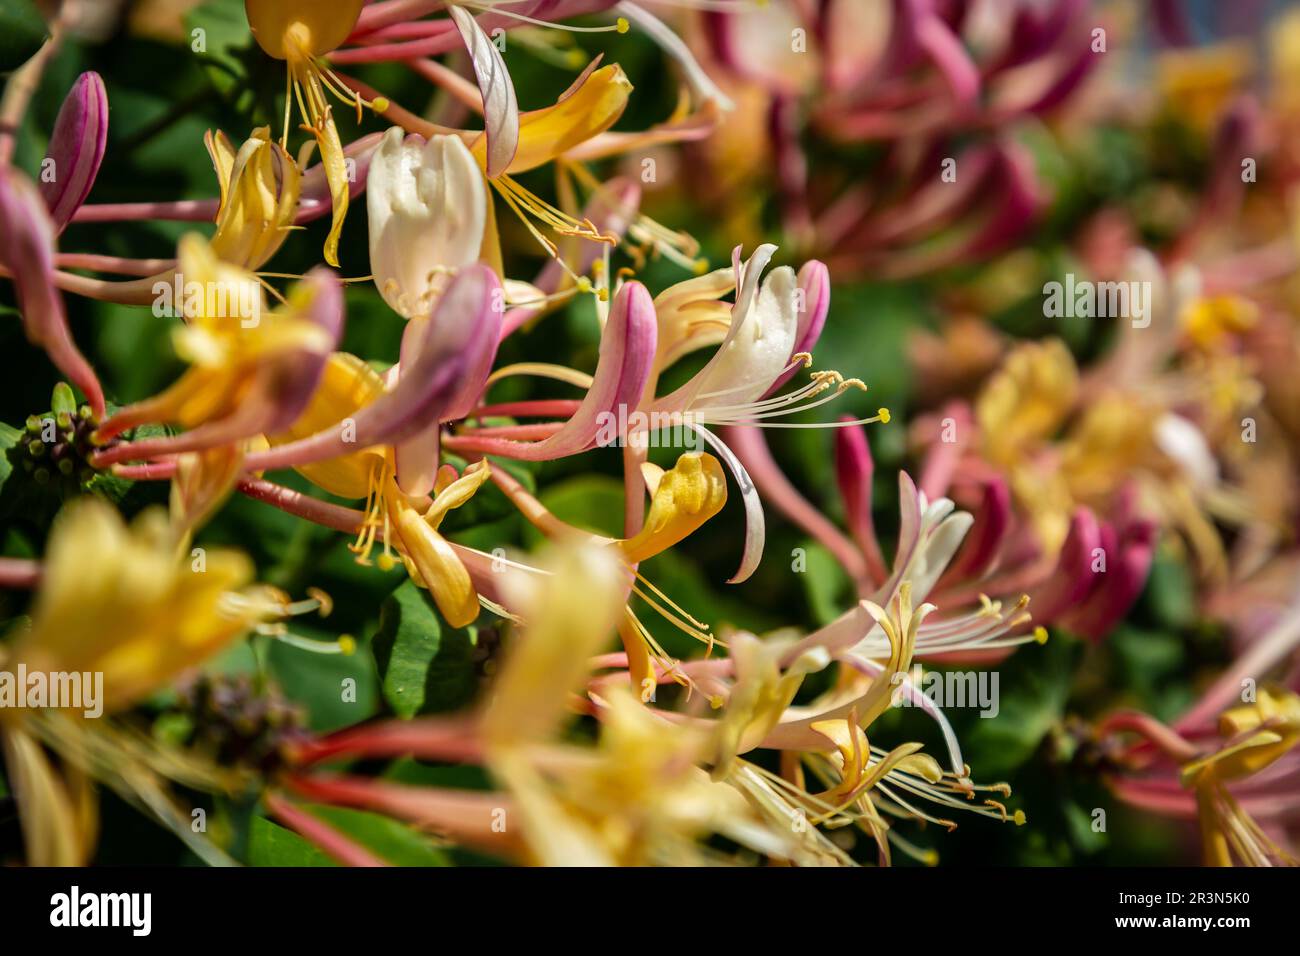 A close up of honeysuckle in flower, with a shallow depth of field Stock Photo